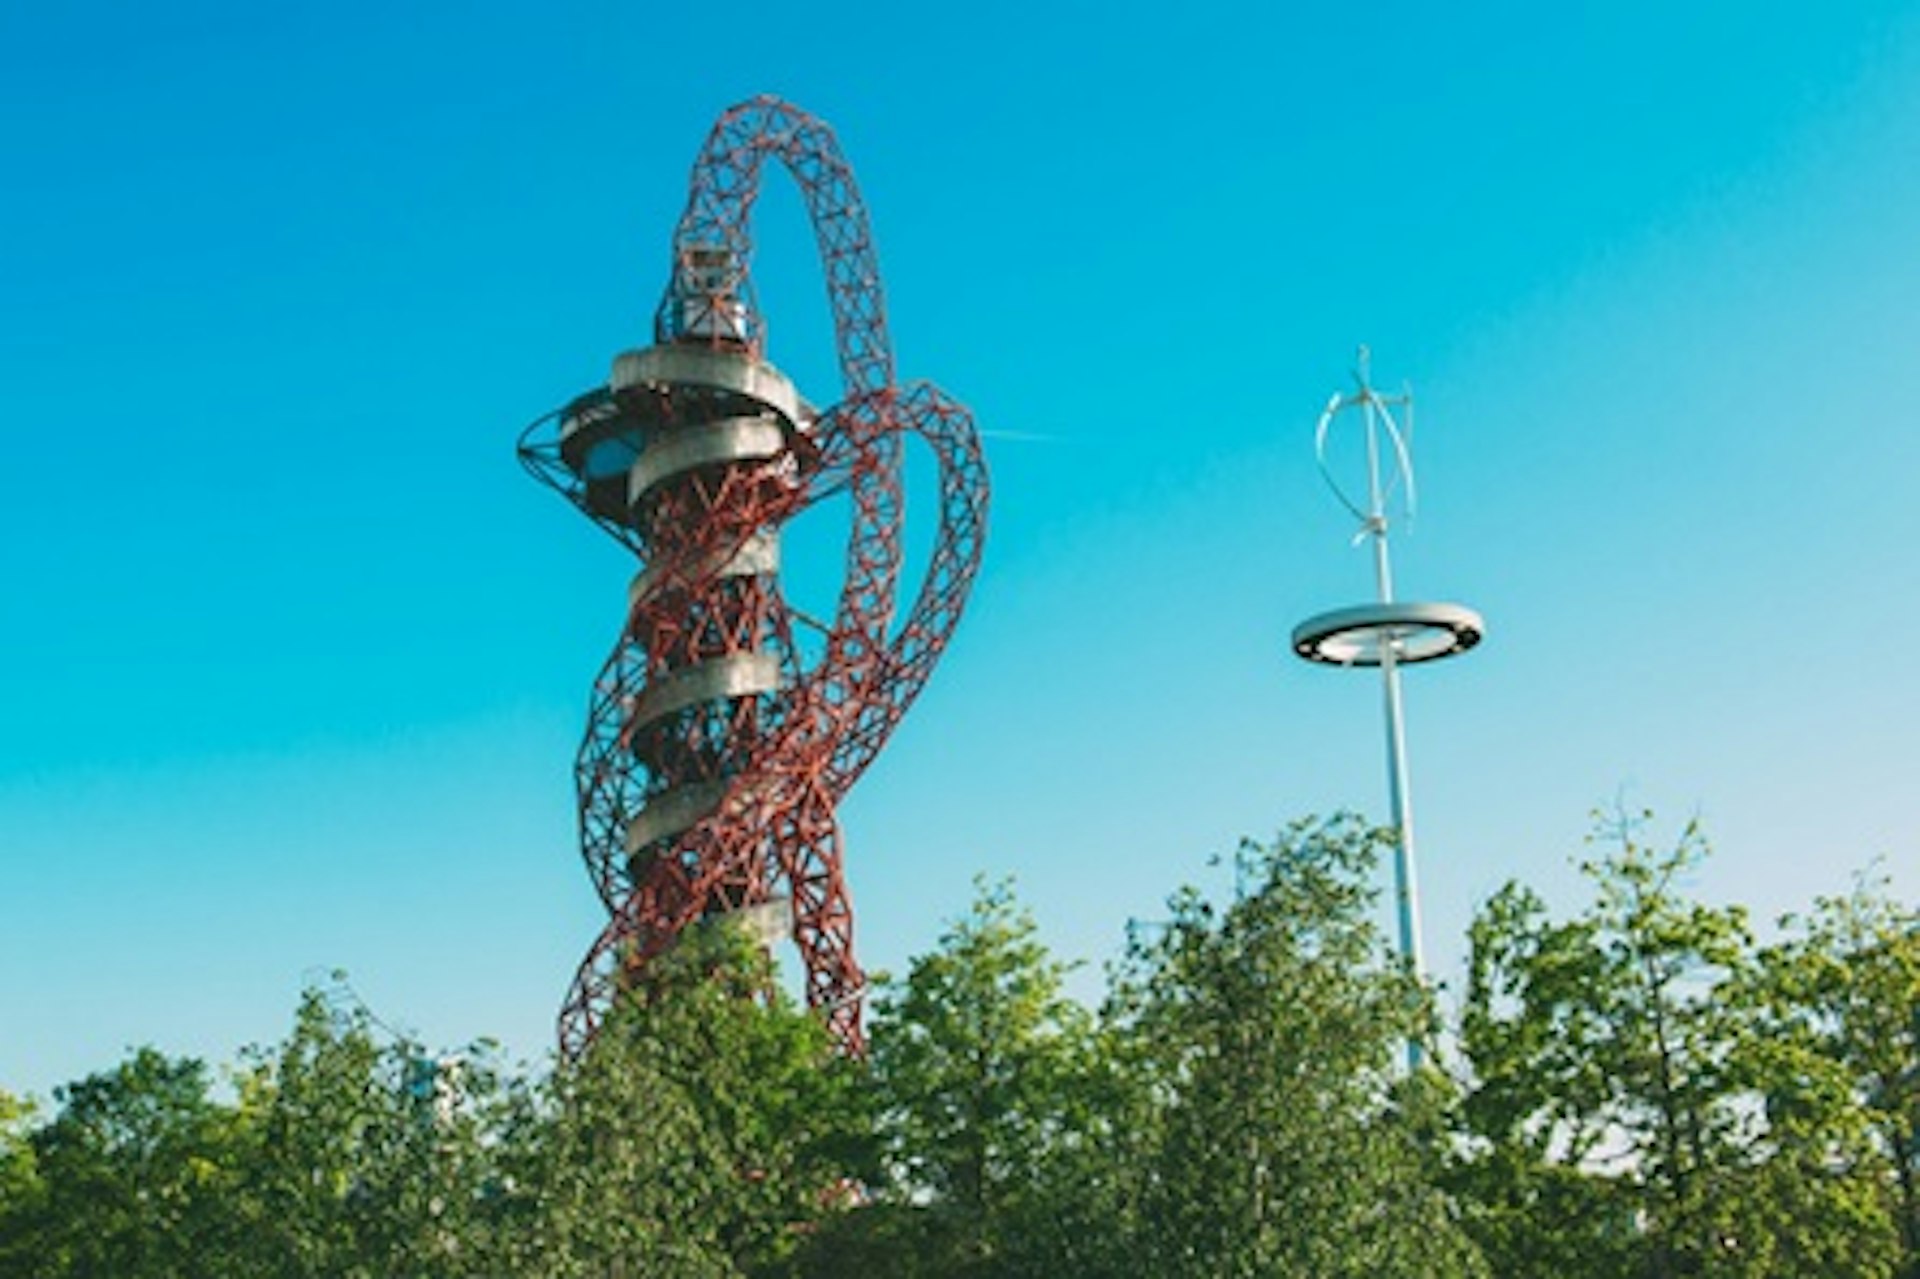 Skyline Views at the ArcelorMittal Orbit and Rum Tasting River Cruise for Two 2